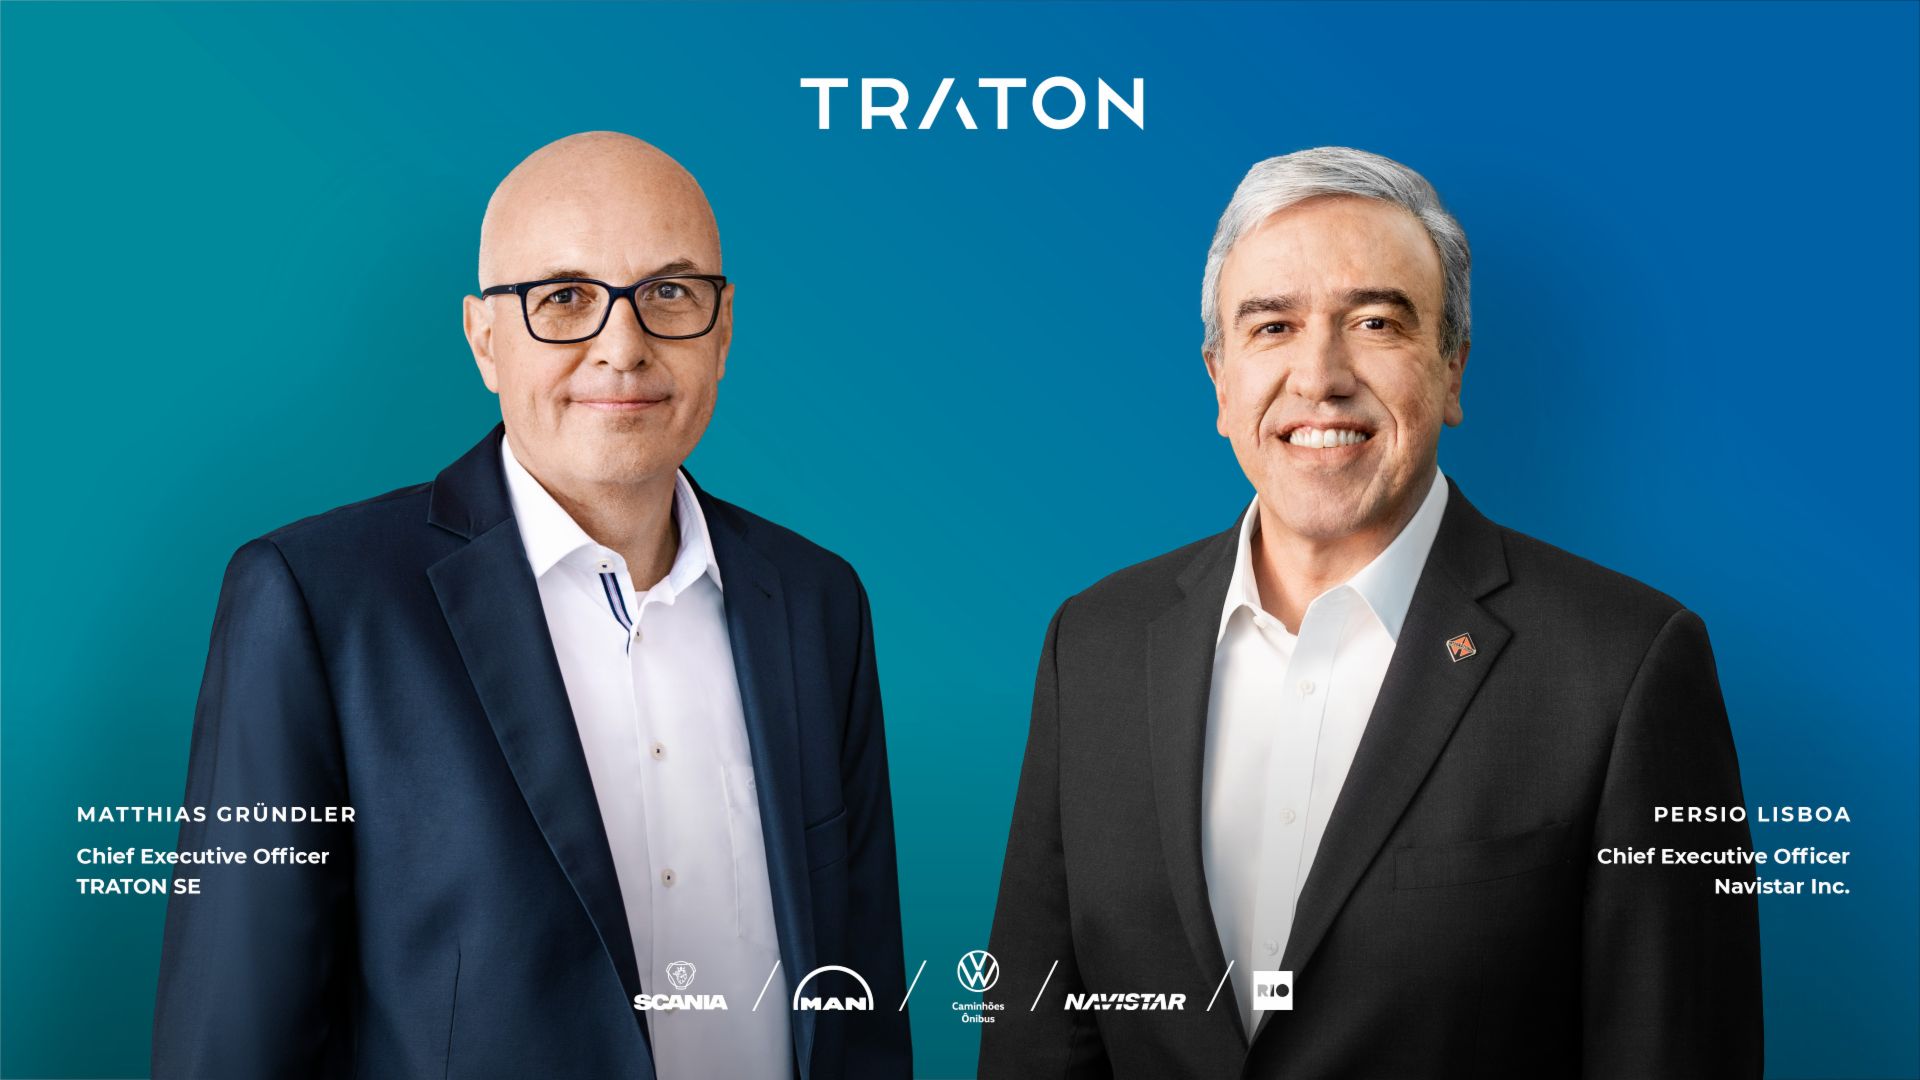 Image of Matthias Gründler (CEO TRATON SE, left) and Persio Lisboa (CEO Navistar Inc., right) in front of a blue background with description and brand logos 